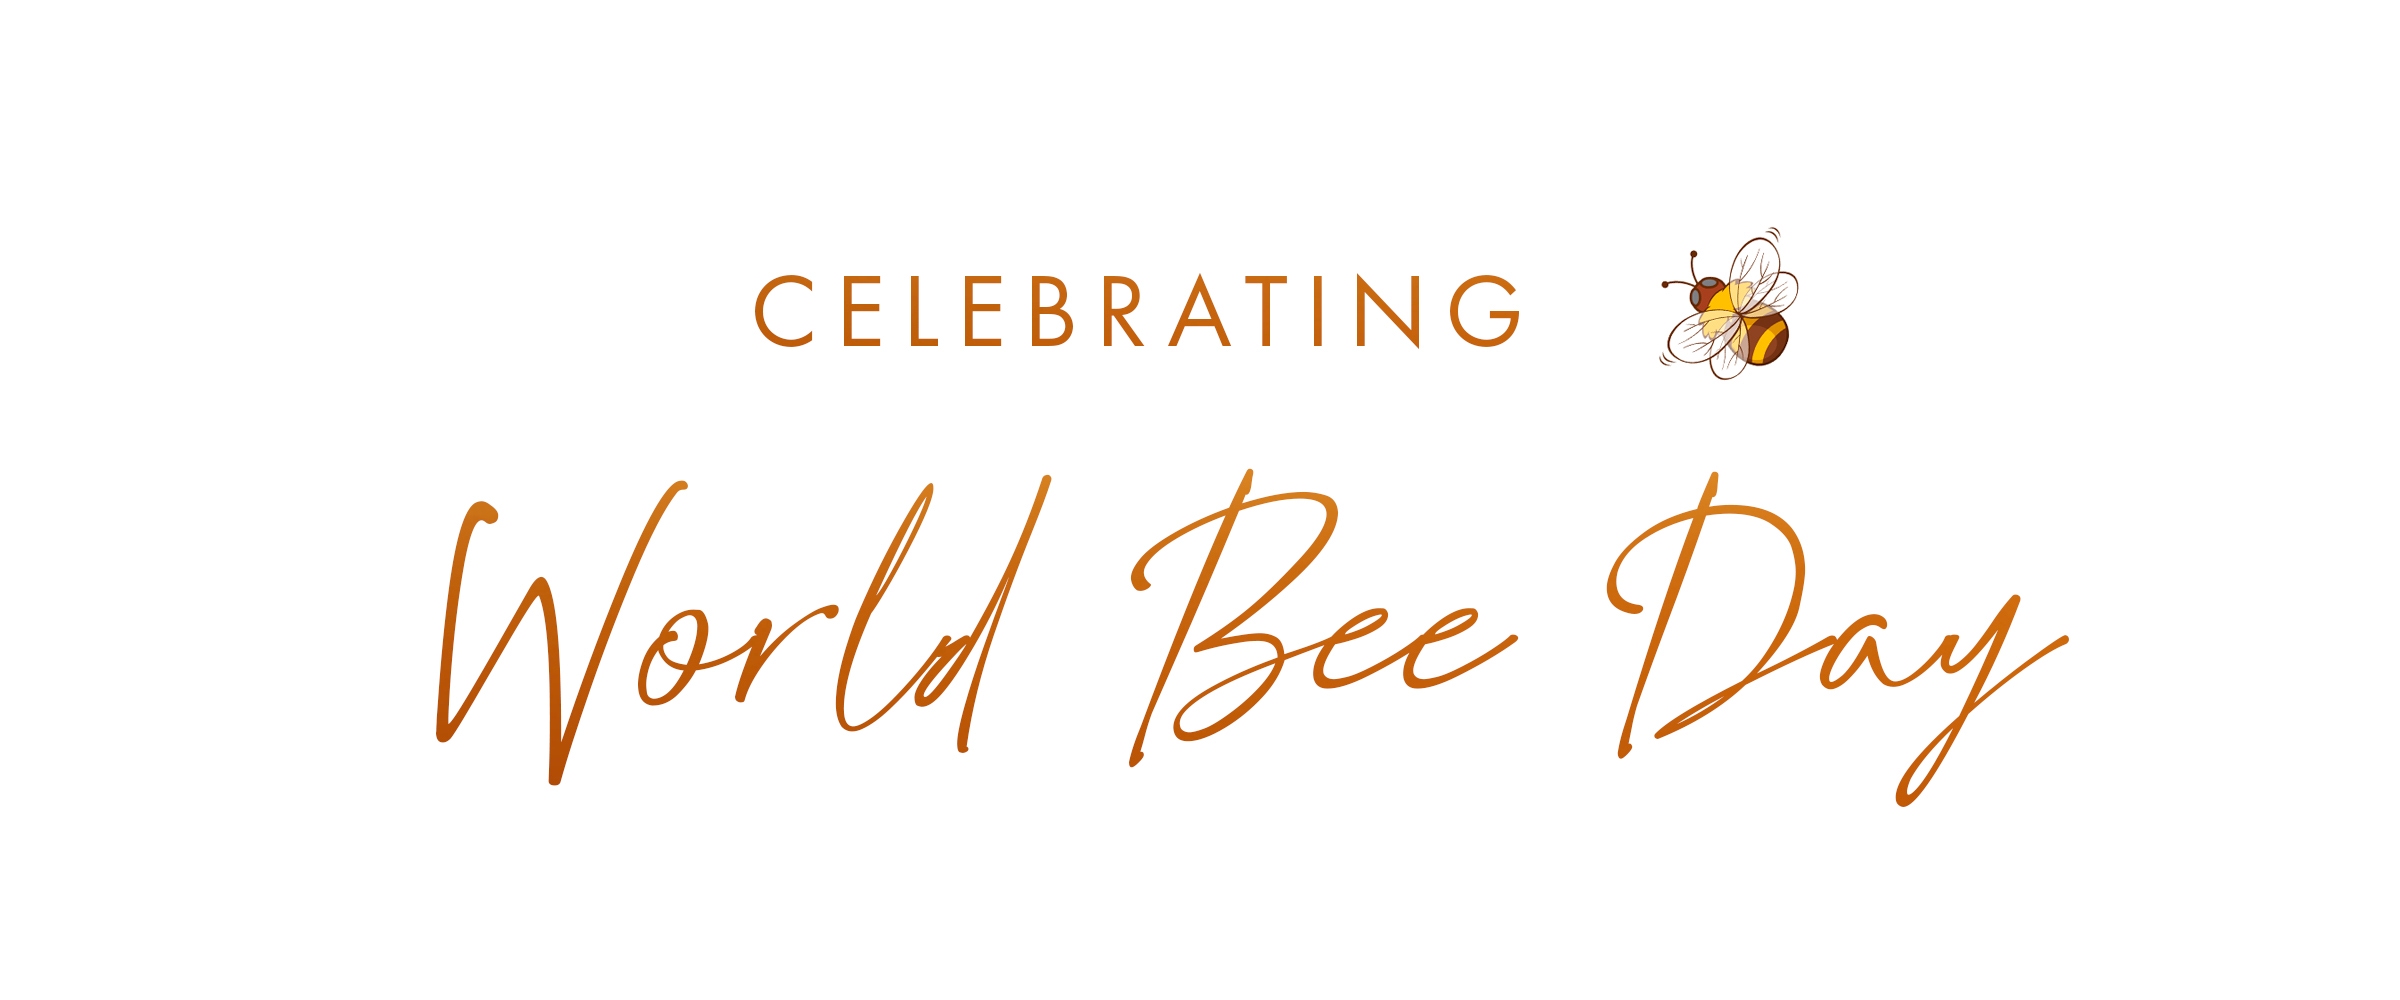 Celebrating World Bee Day With ANNE FONTAINE